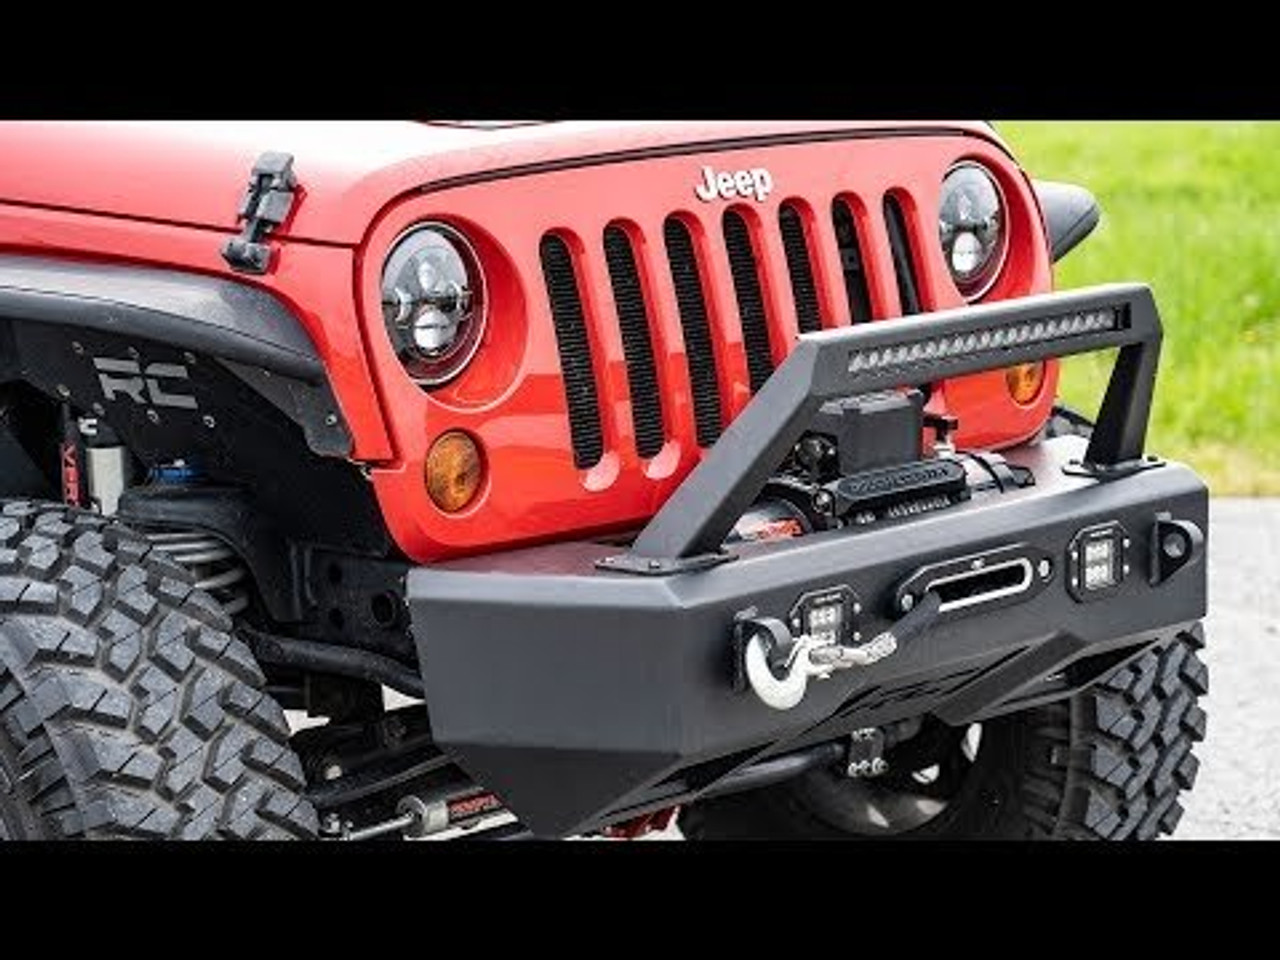 Jeep 7 Inch LED Projection Headlights Wrangler TJ, JK Rough Country